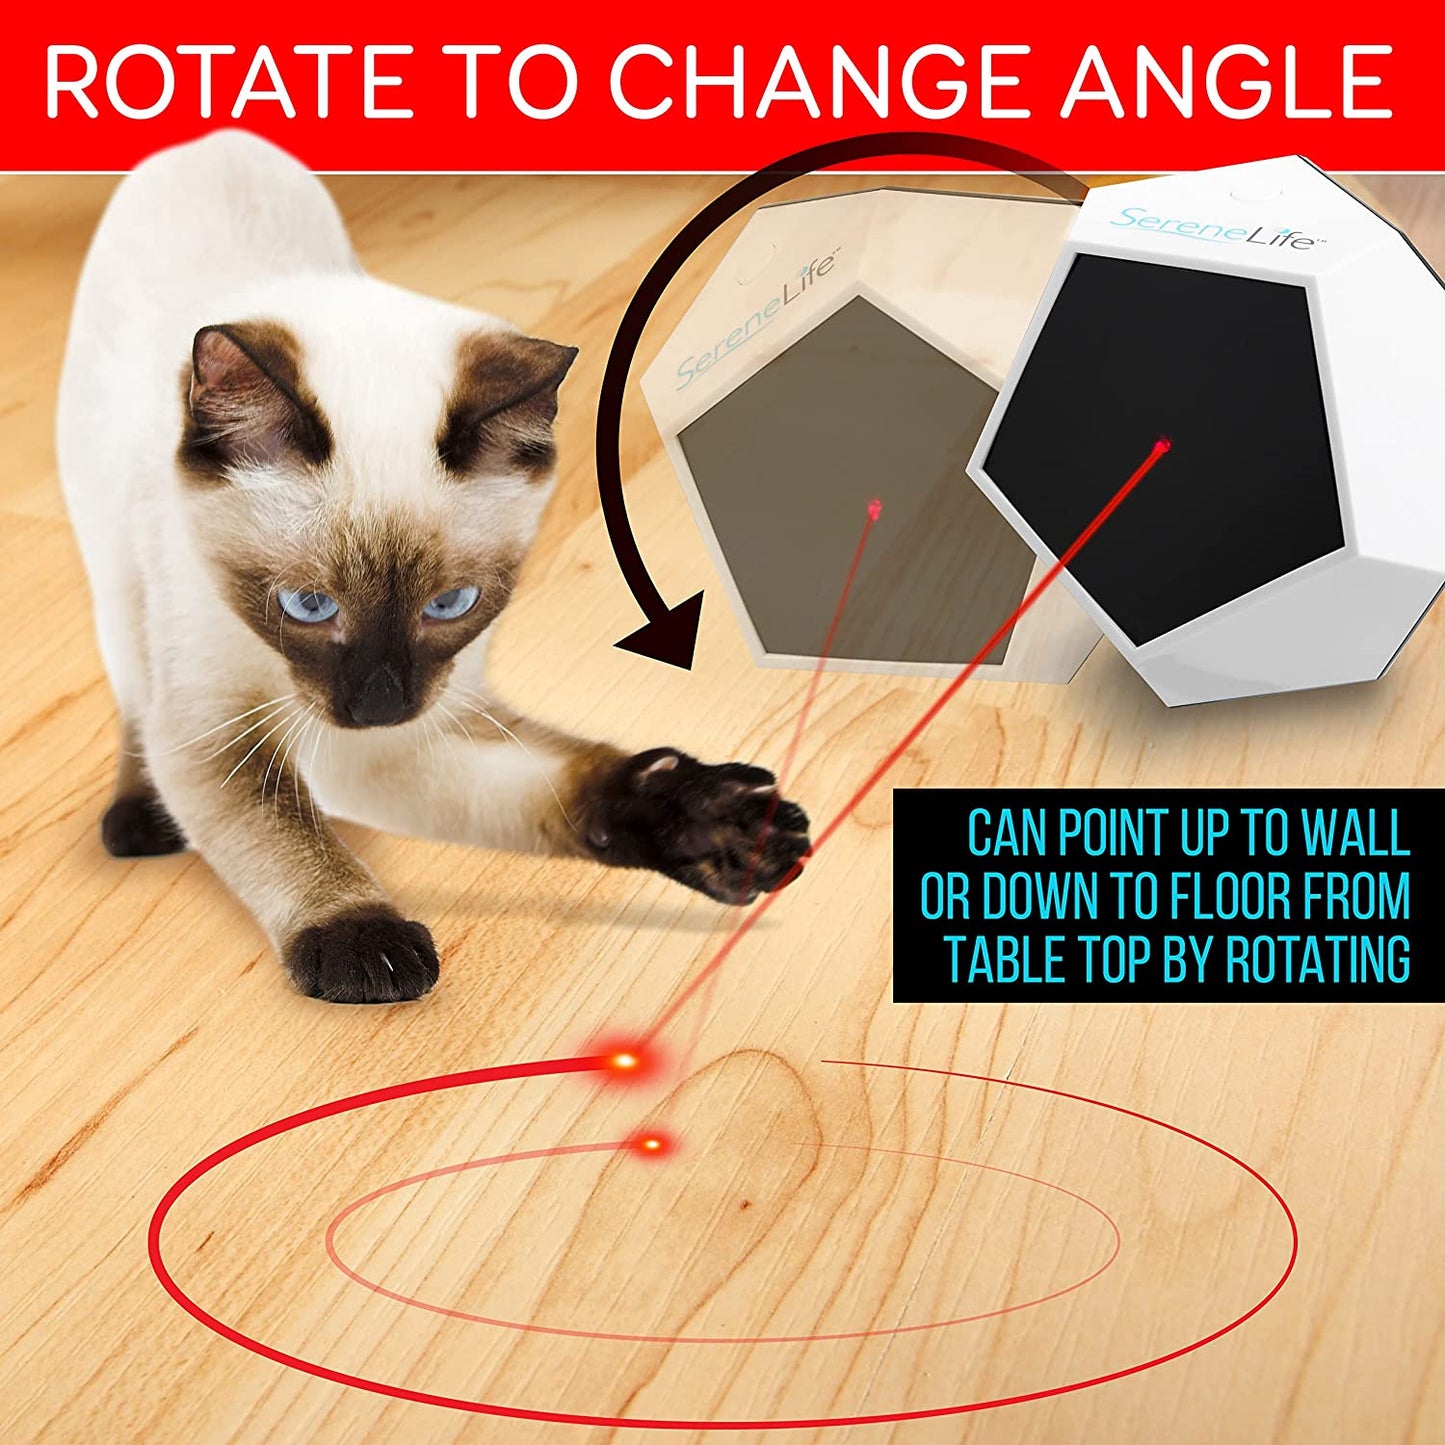 Automatic Cat Light Toy 